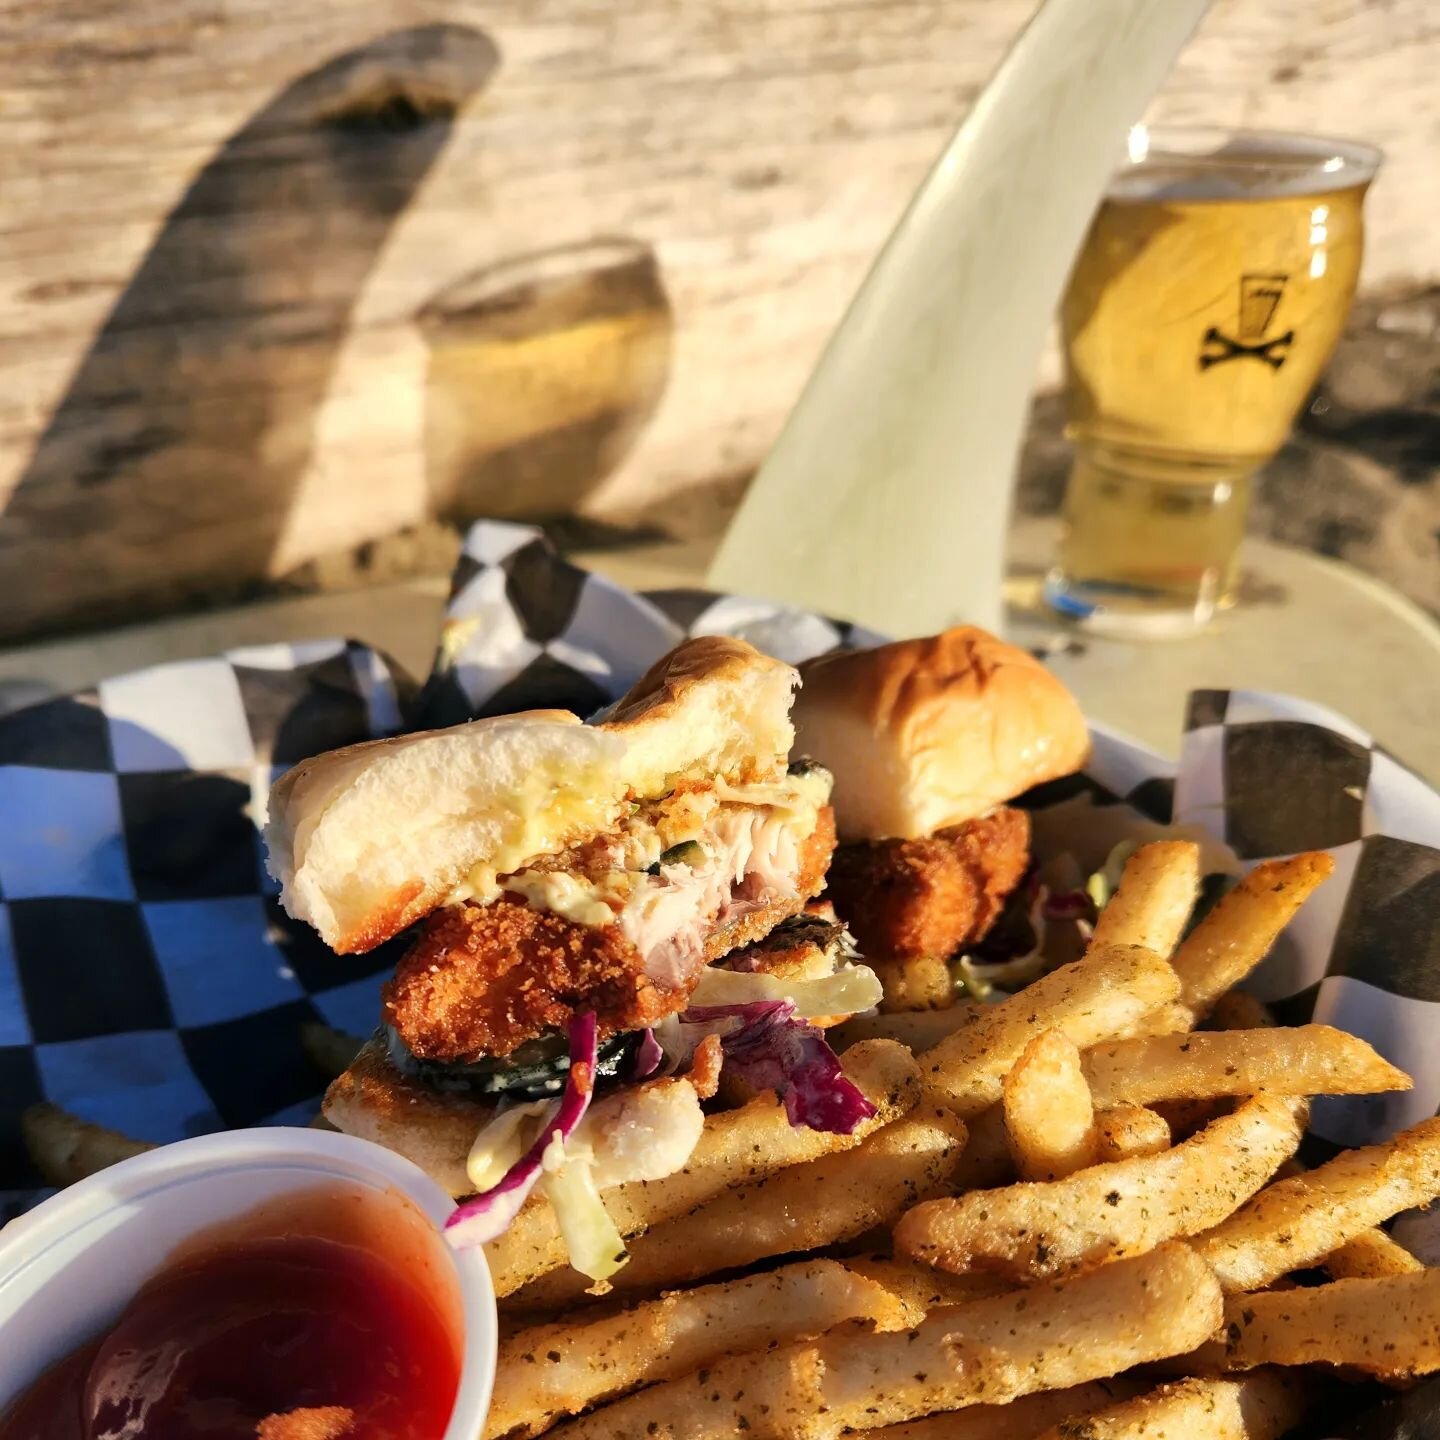 🥀❤️New Special❤️🥀
We have a brand NEW special available in the taproom...
 
Mackerel Sliders 

Panko breaded mackerel, japanese tartar sauce, cabbage, king's hawaiian rolls, and your choice of a side of fries or salad.